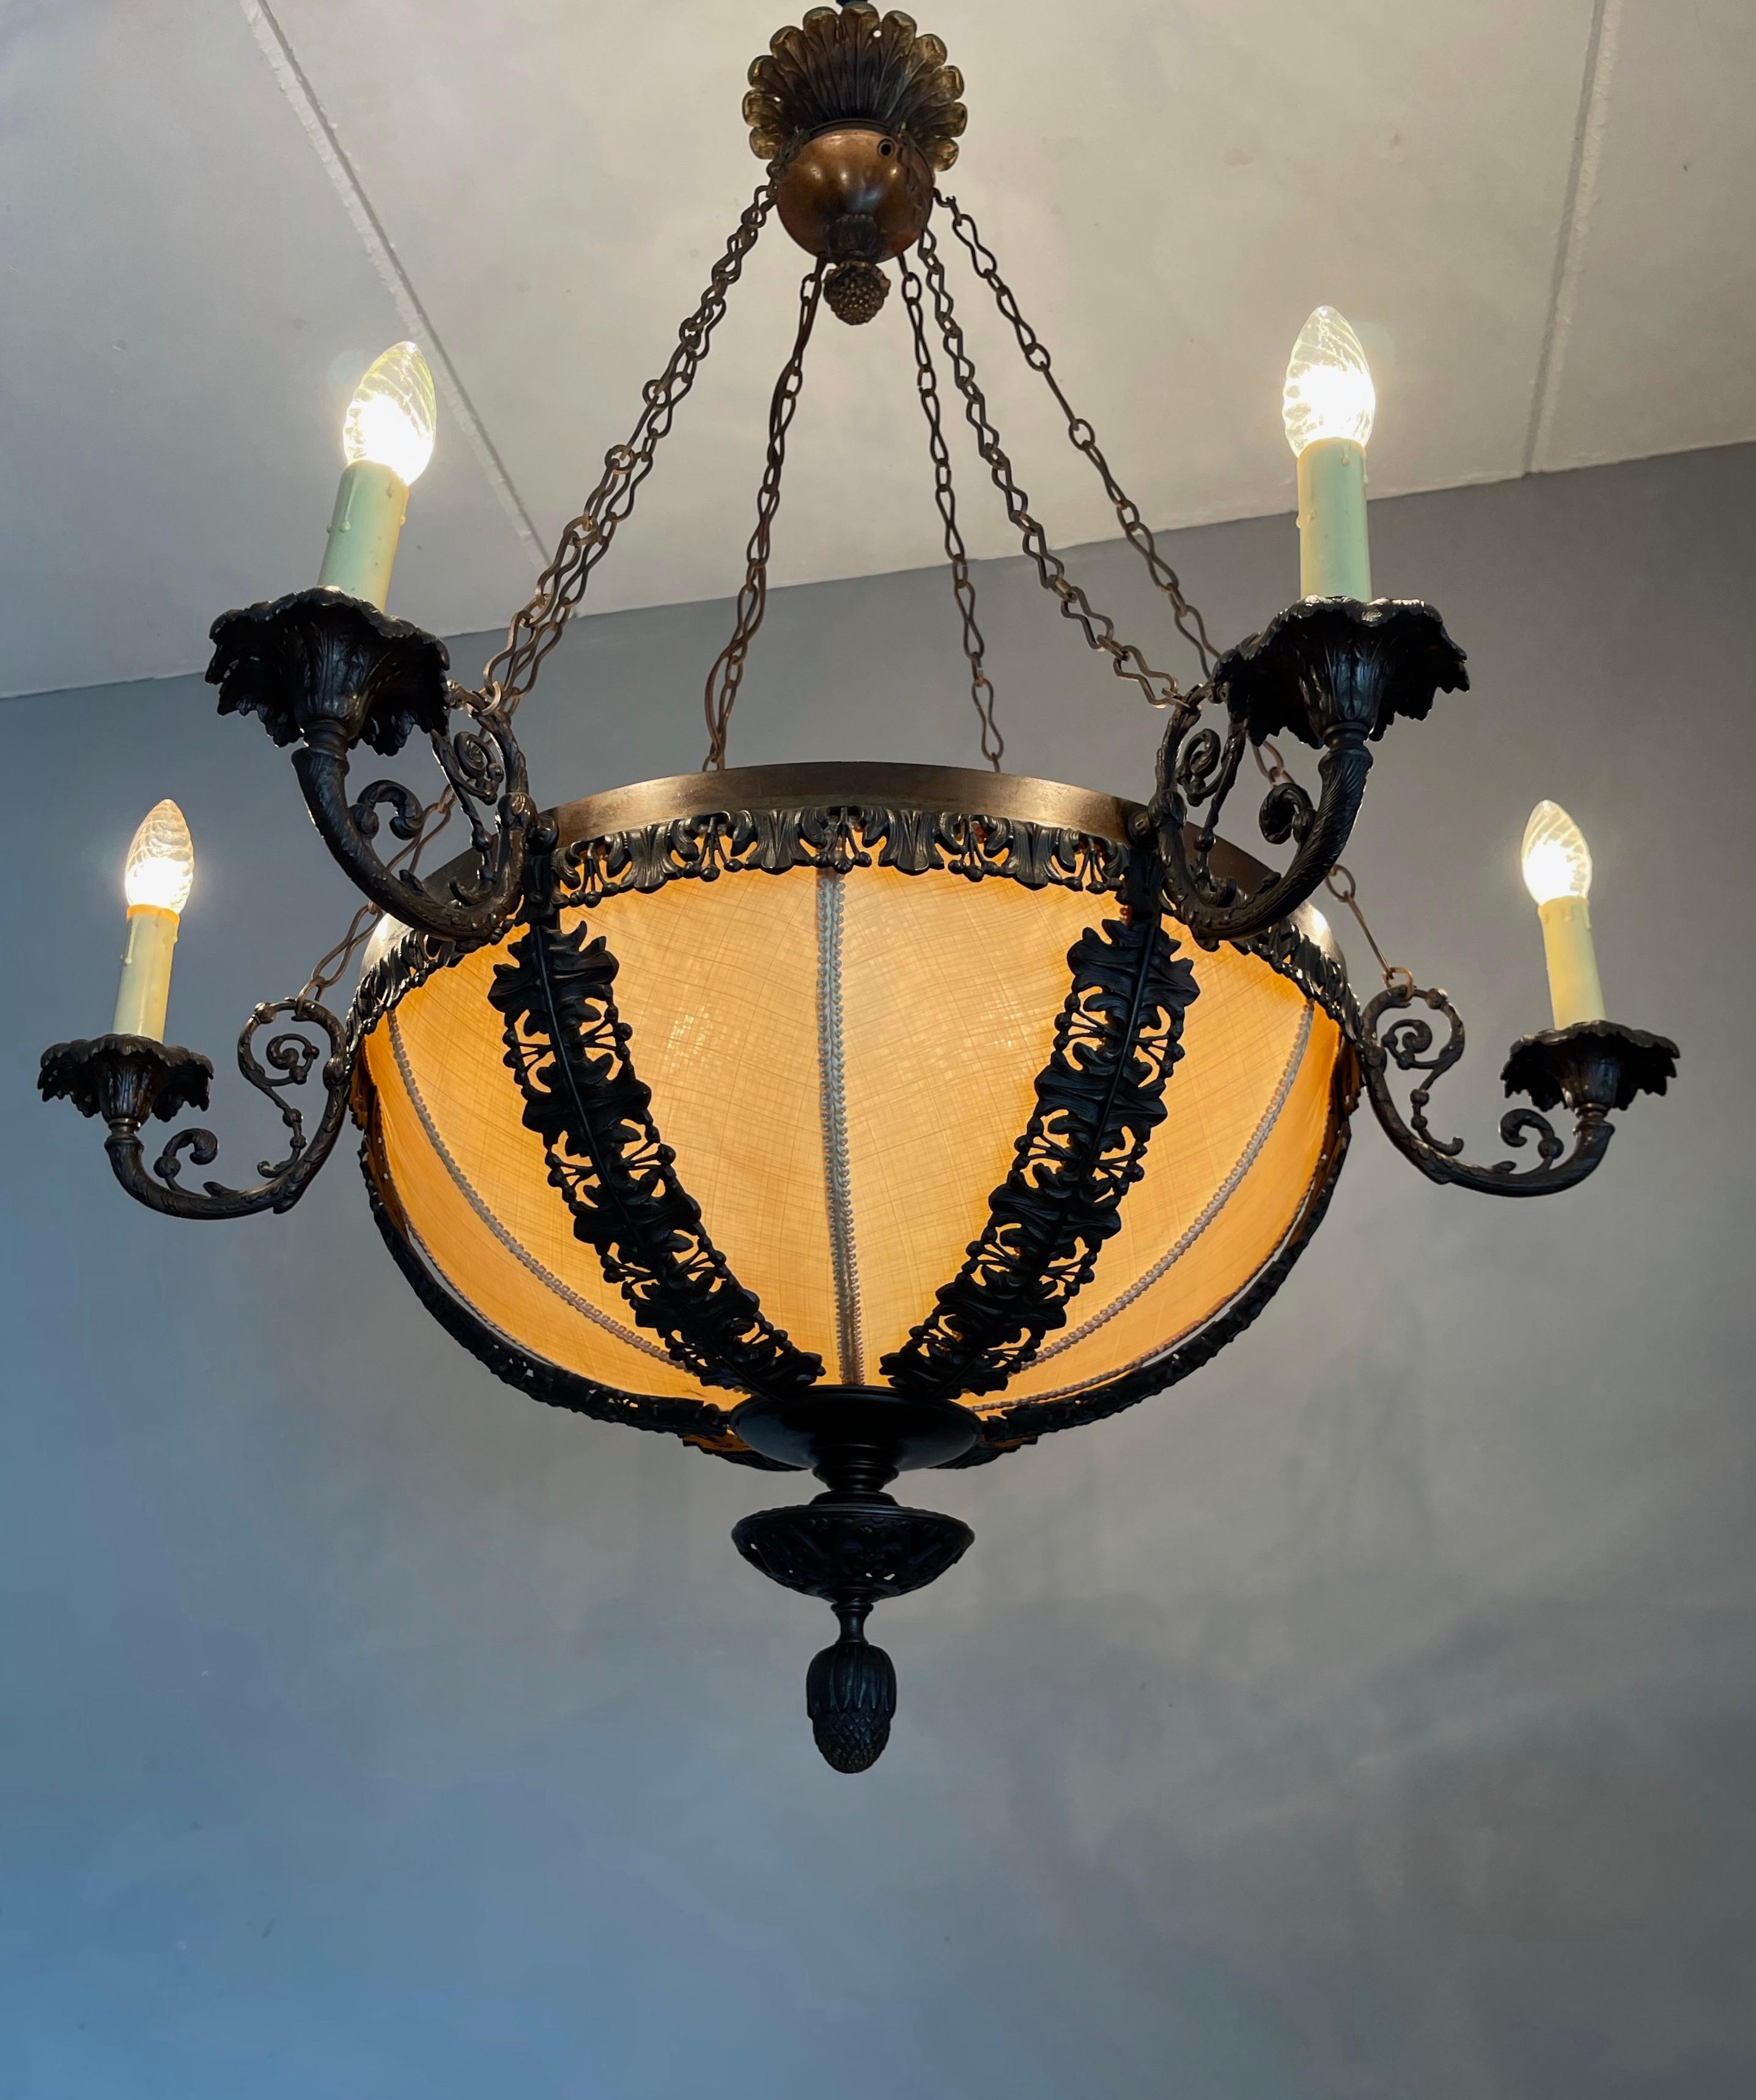 Hand-Crafted Unique Bronze Arts & Crafts Era Stately Chandelier w Intricate Scrolling Details